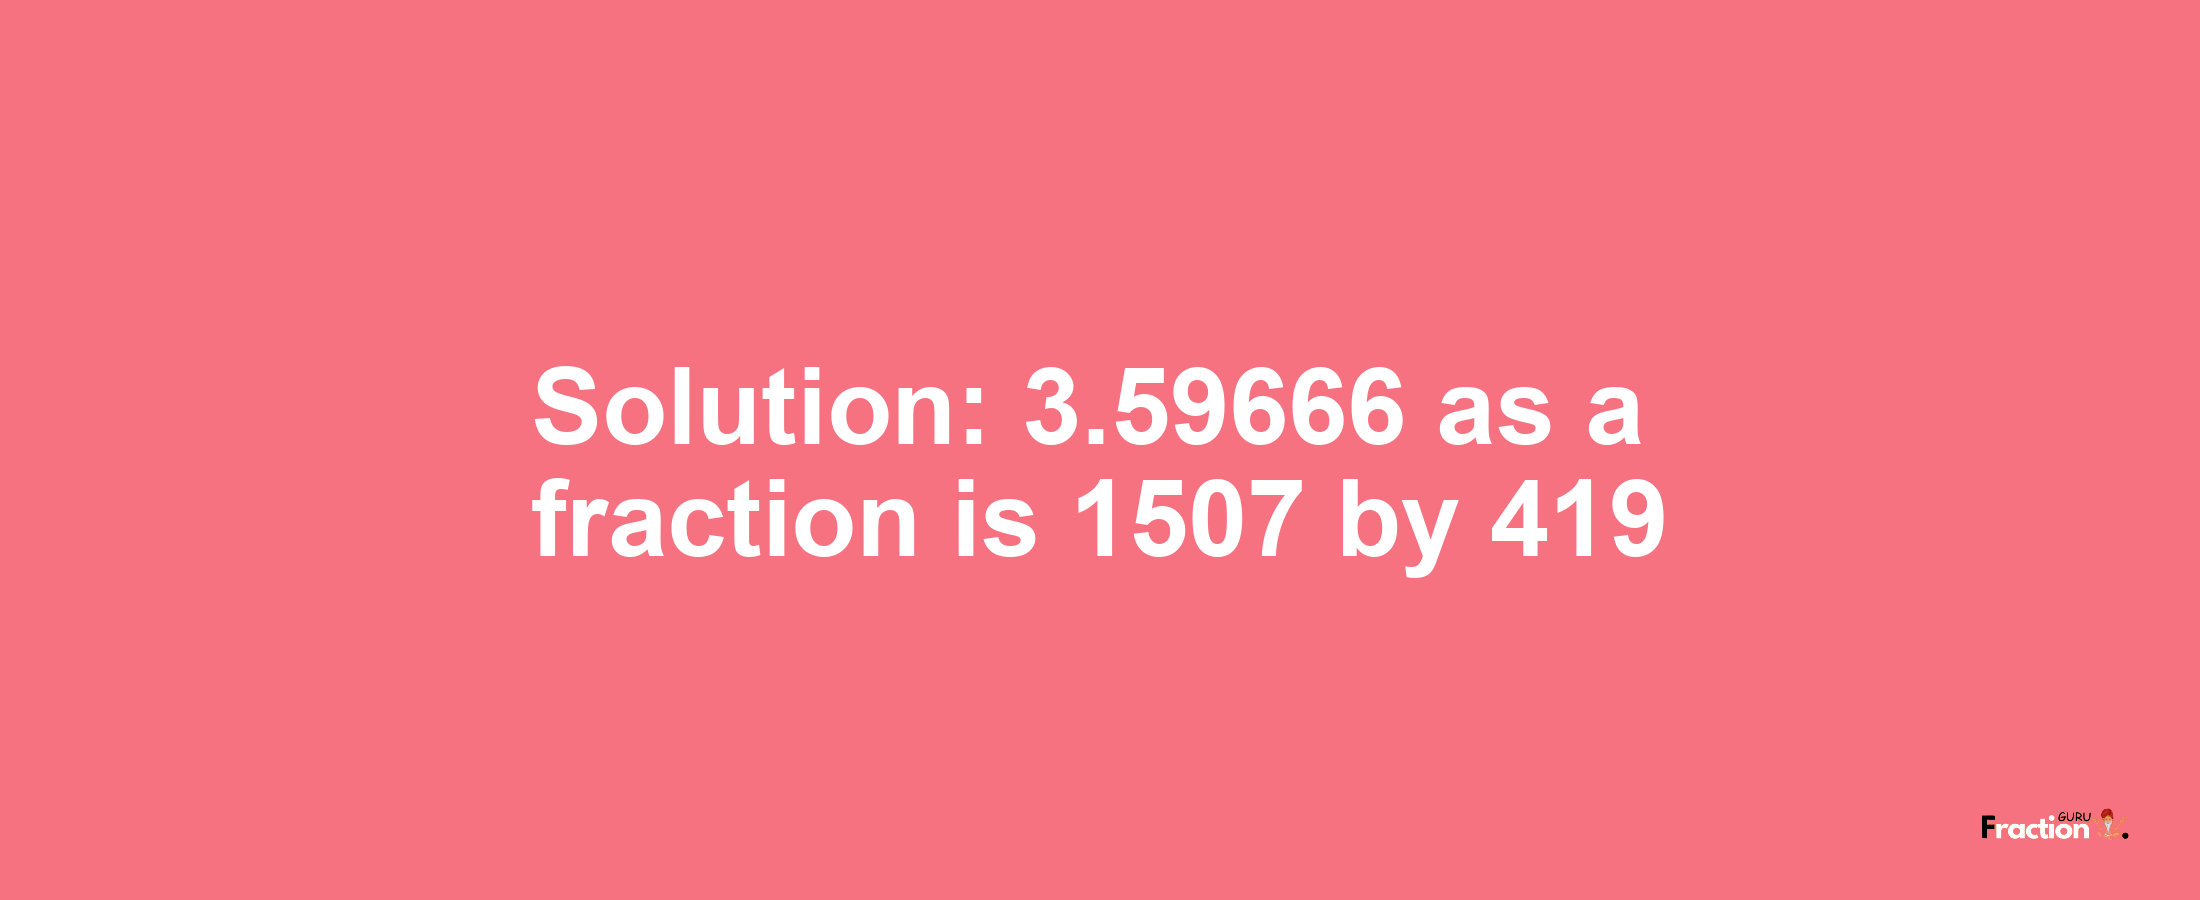 Solution:3.59666 as a fraction is 1507/419